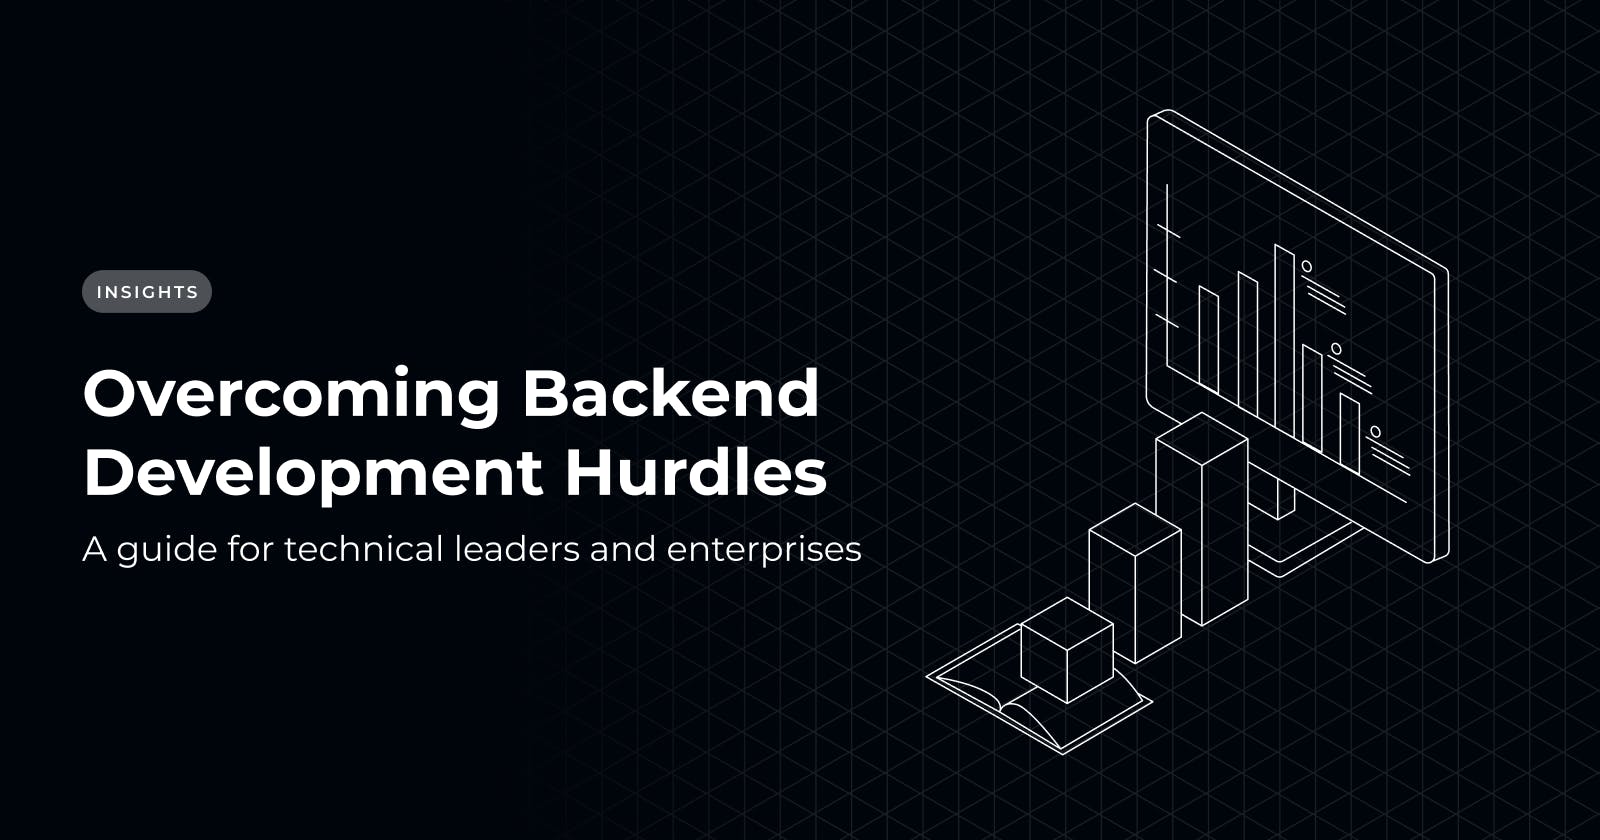 Overcoming Backend Development Hurdles Faced by Enterprises and Technical Leaders